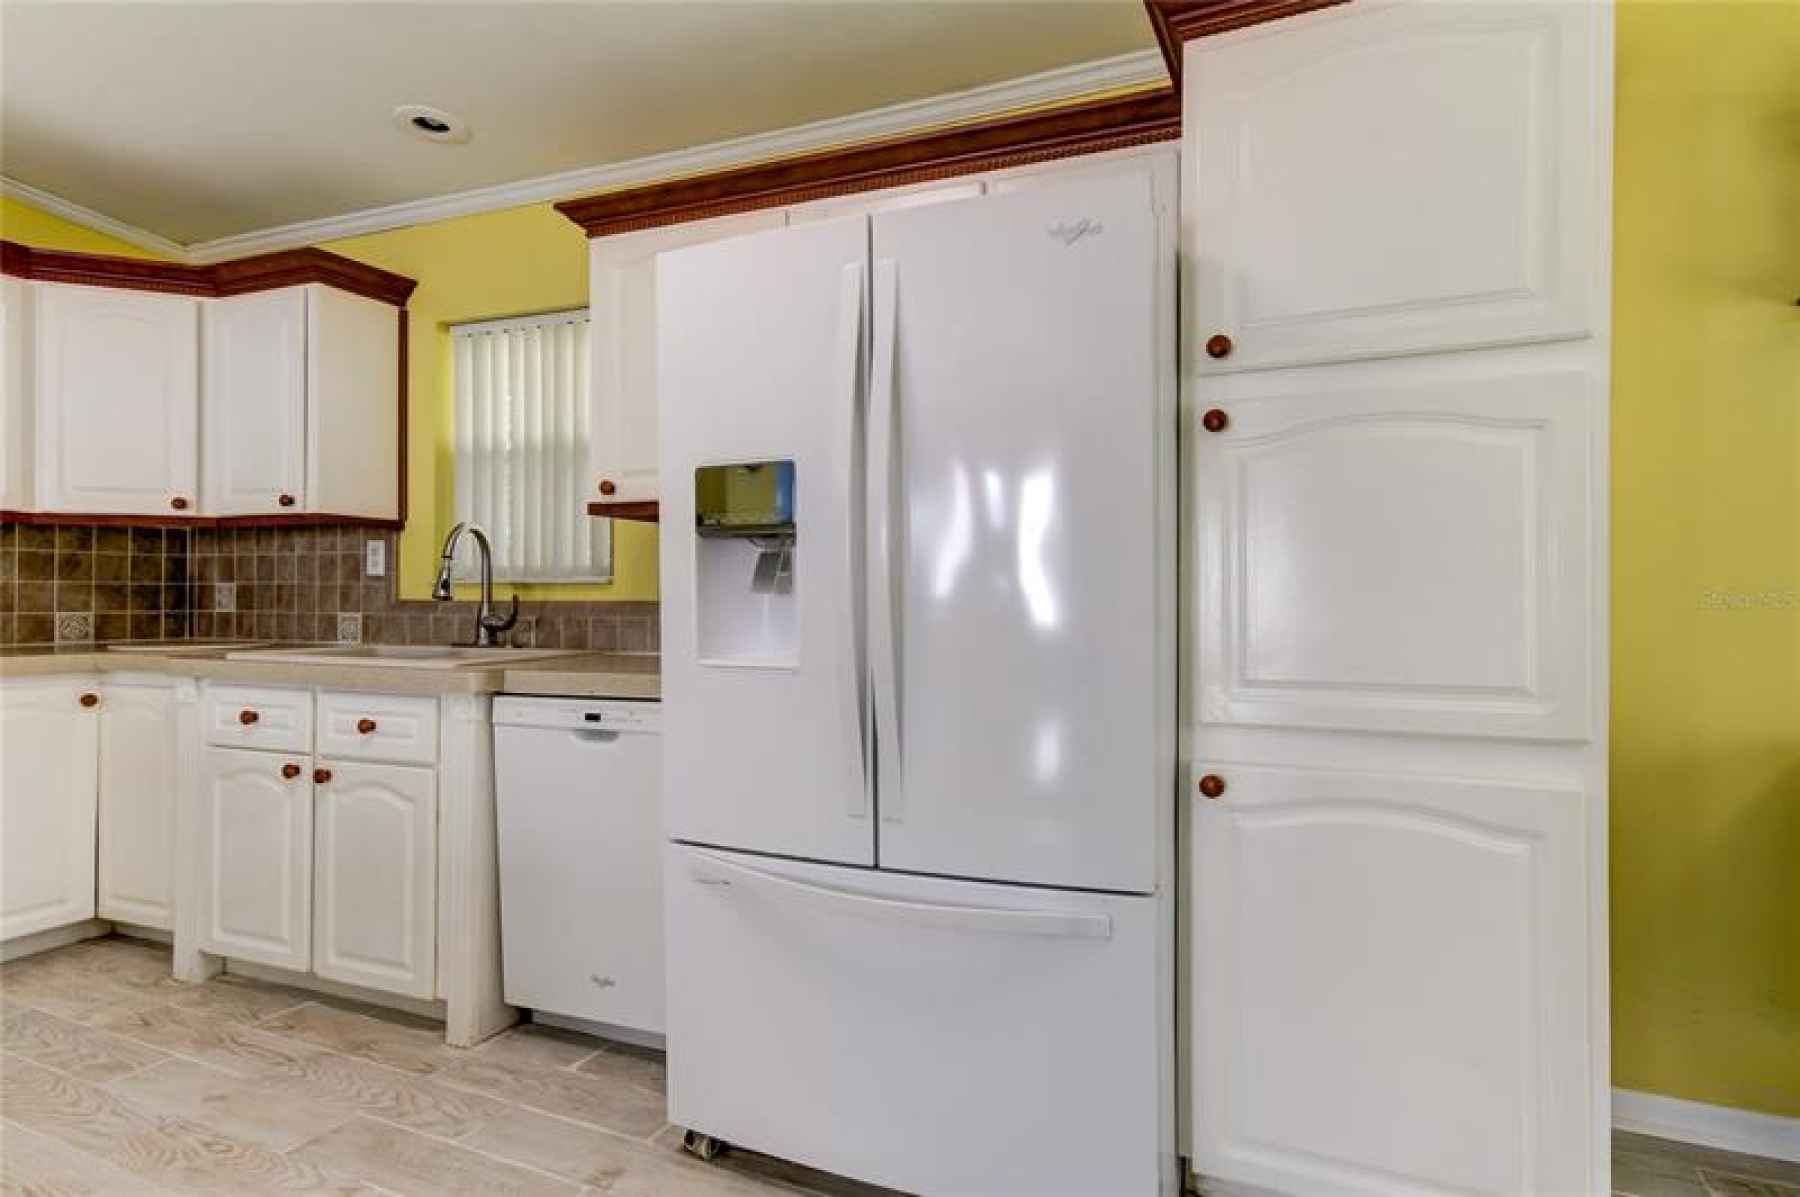 YOU WON'T RUN OUT OF ROOM FOR STORAGE IN THIS KITCHEN!